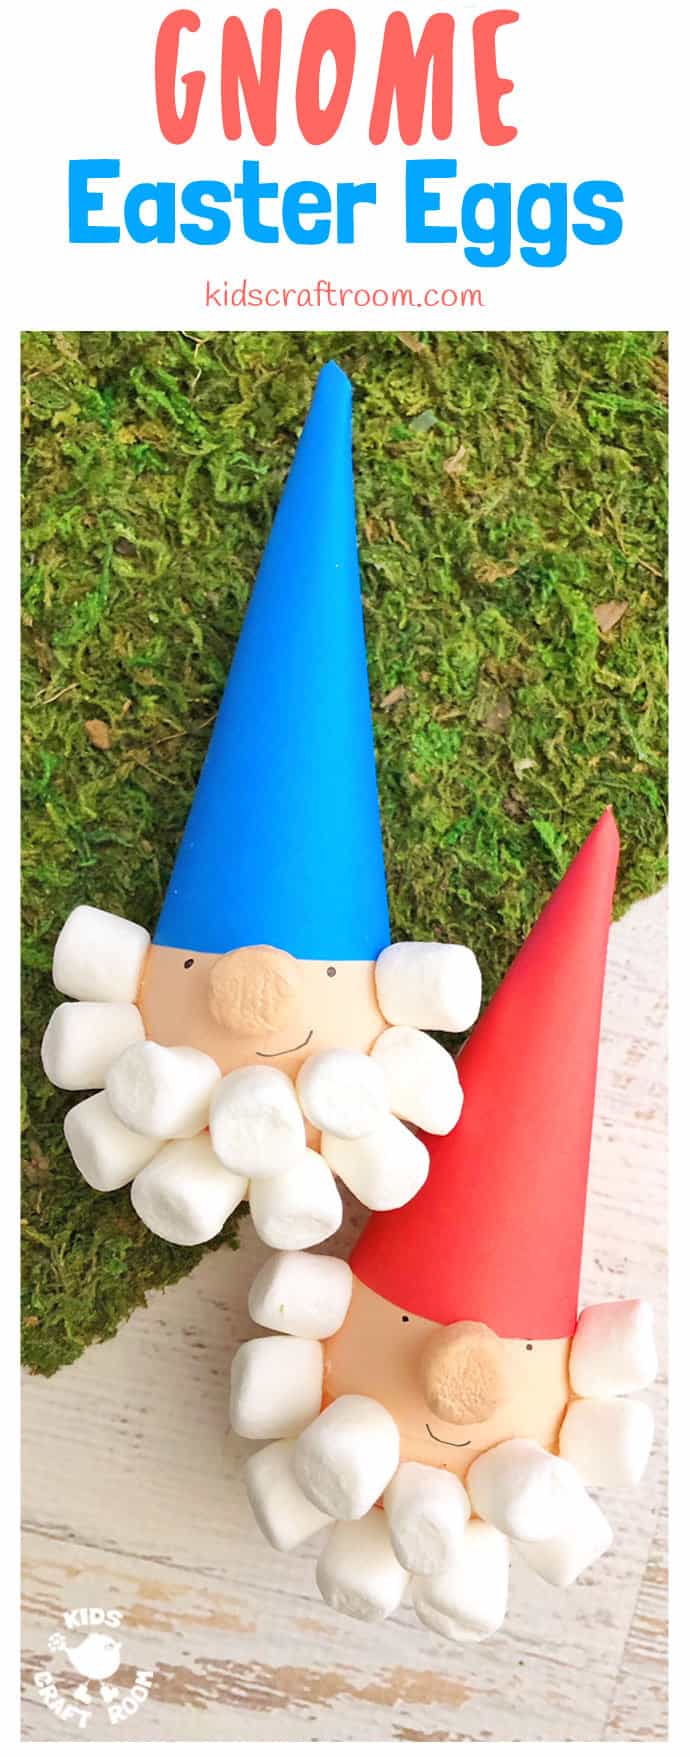 Two Gnome Easter Egg Crafts For Kids. One with a blue hat and one with a red.